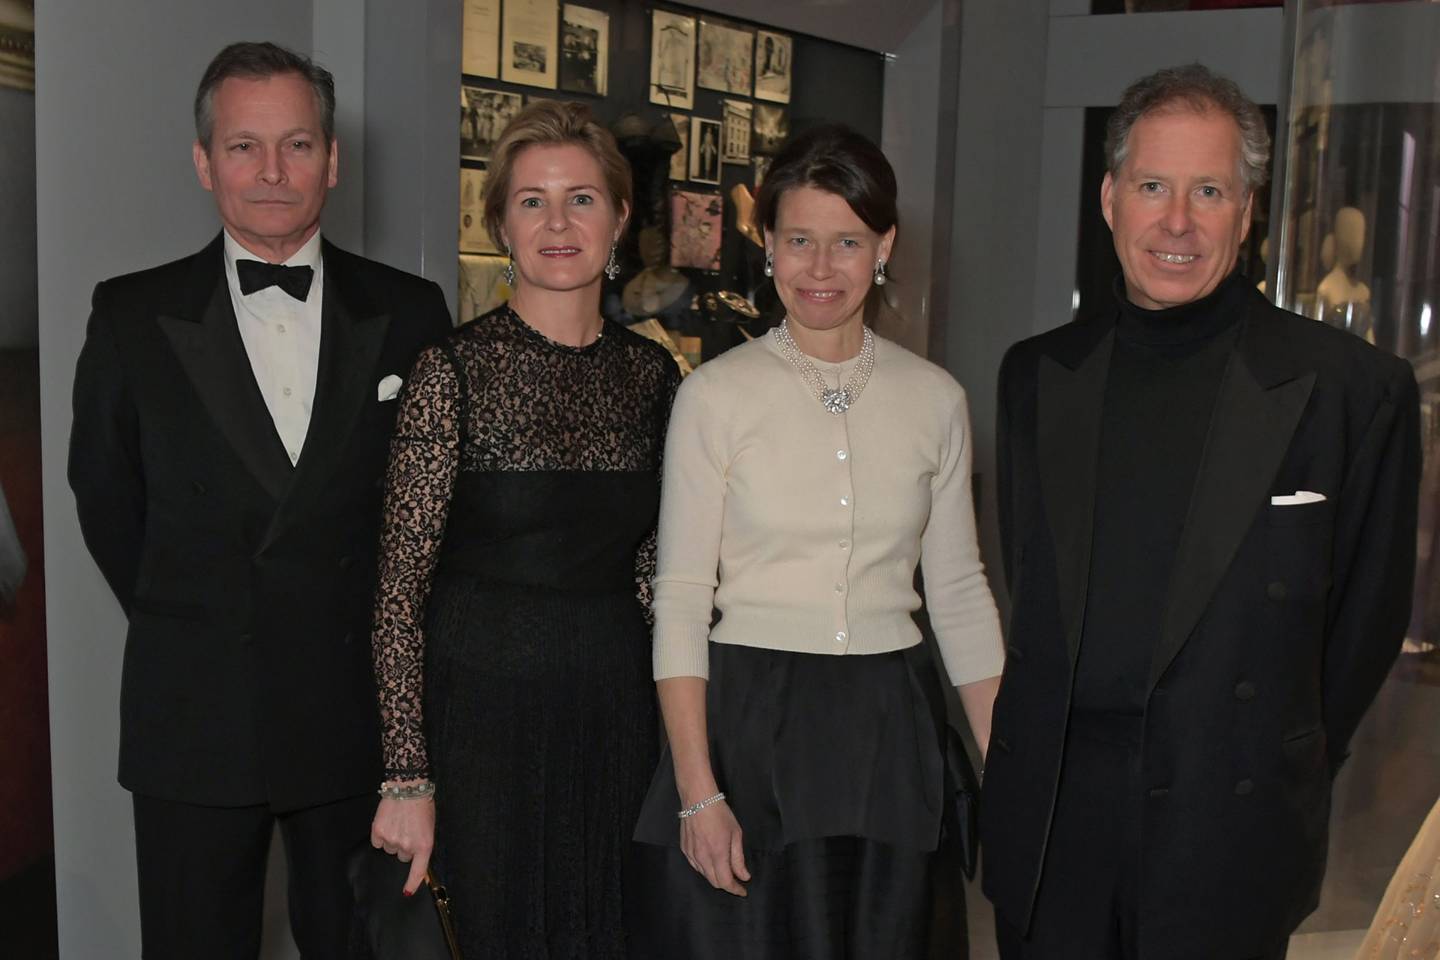 daniel-chatto-serena-armstrong-jones-countess-of-snowdon-lady-sarah-chatto-and-david-armstrong-jones-2nd-earl-of-snowdon-at-the-christian-dior-exhibition-in-london2.jpg